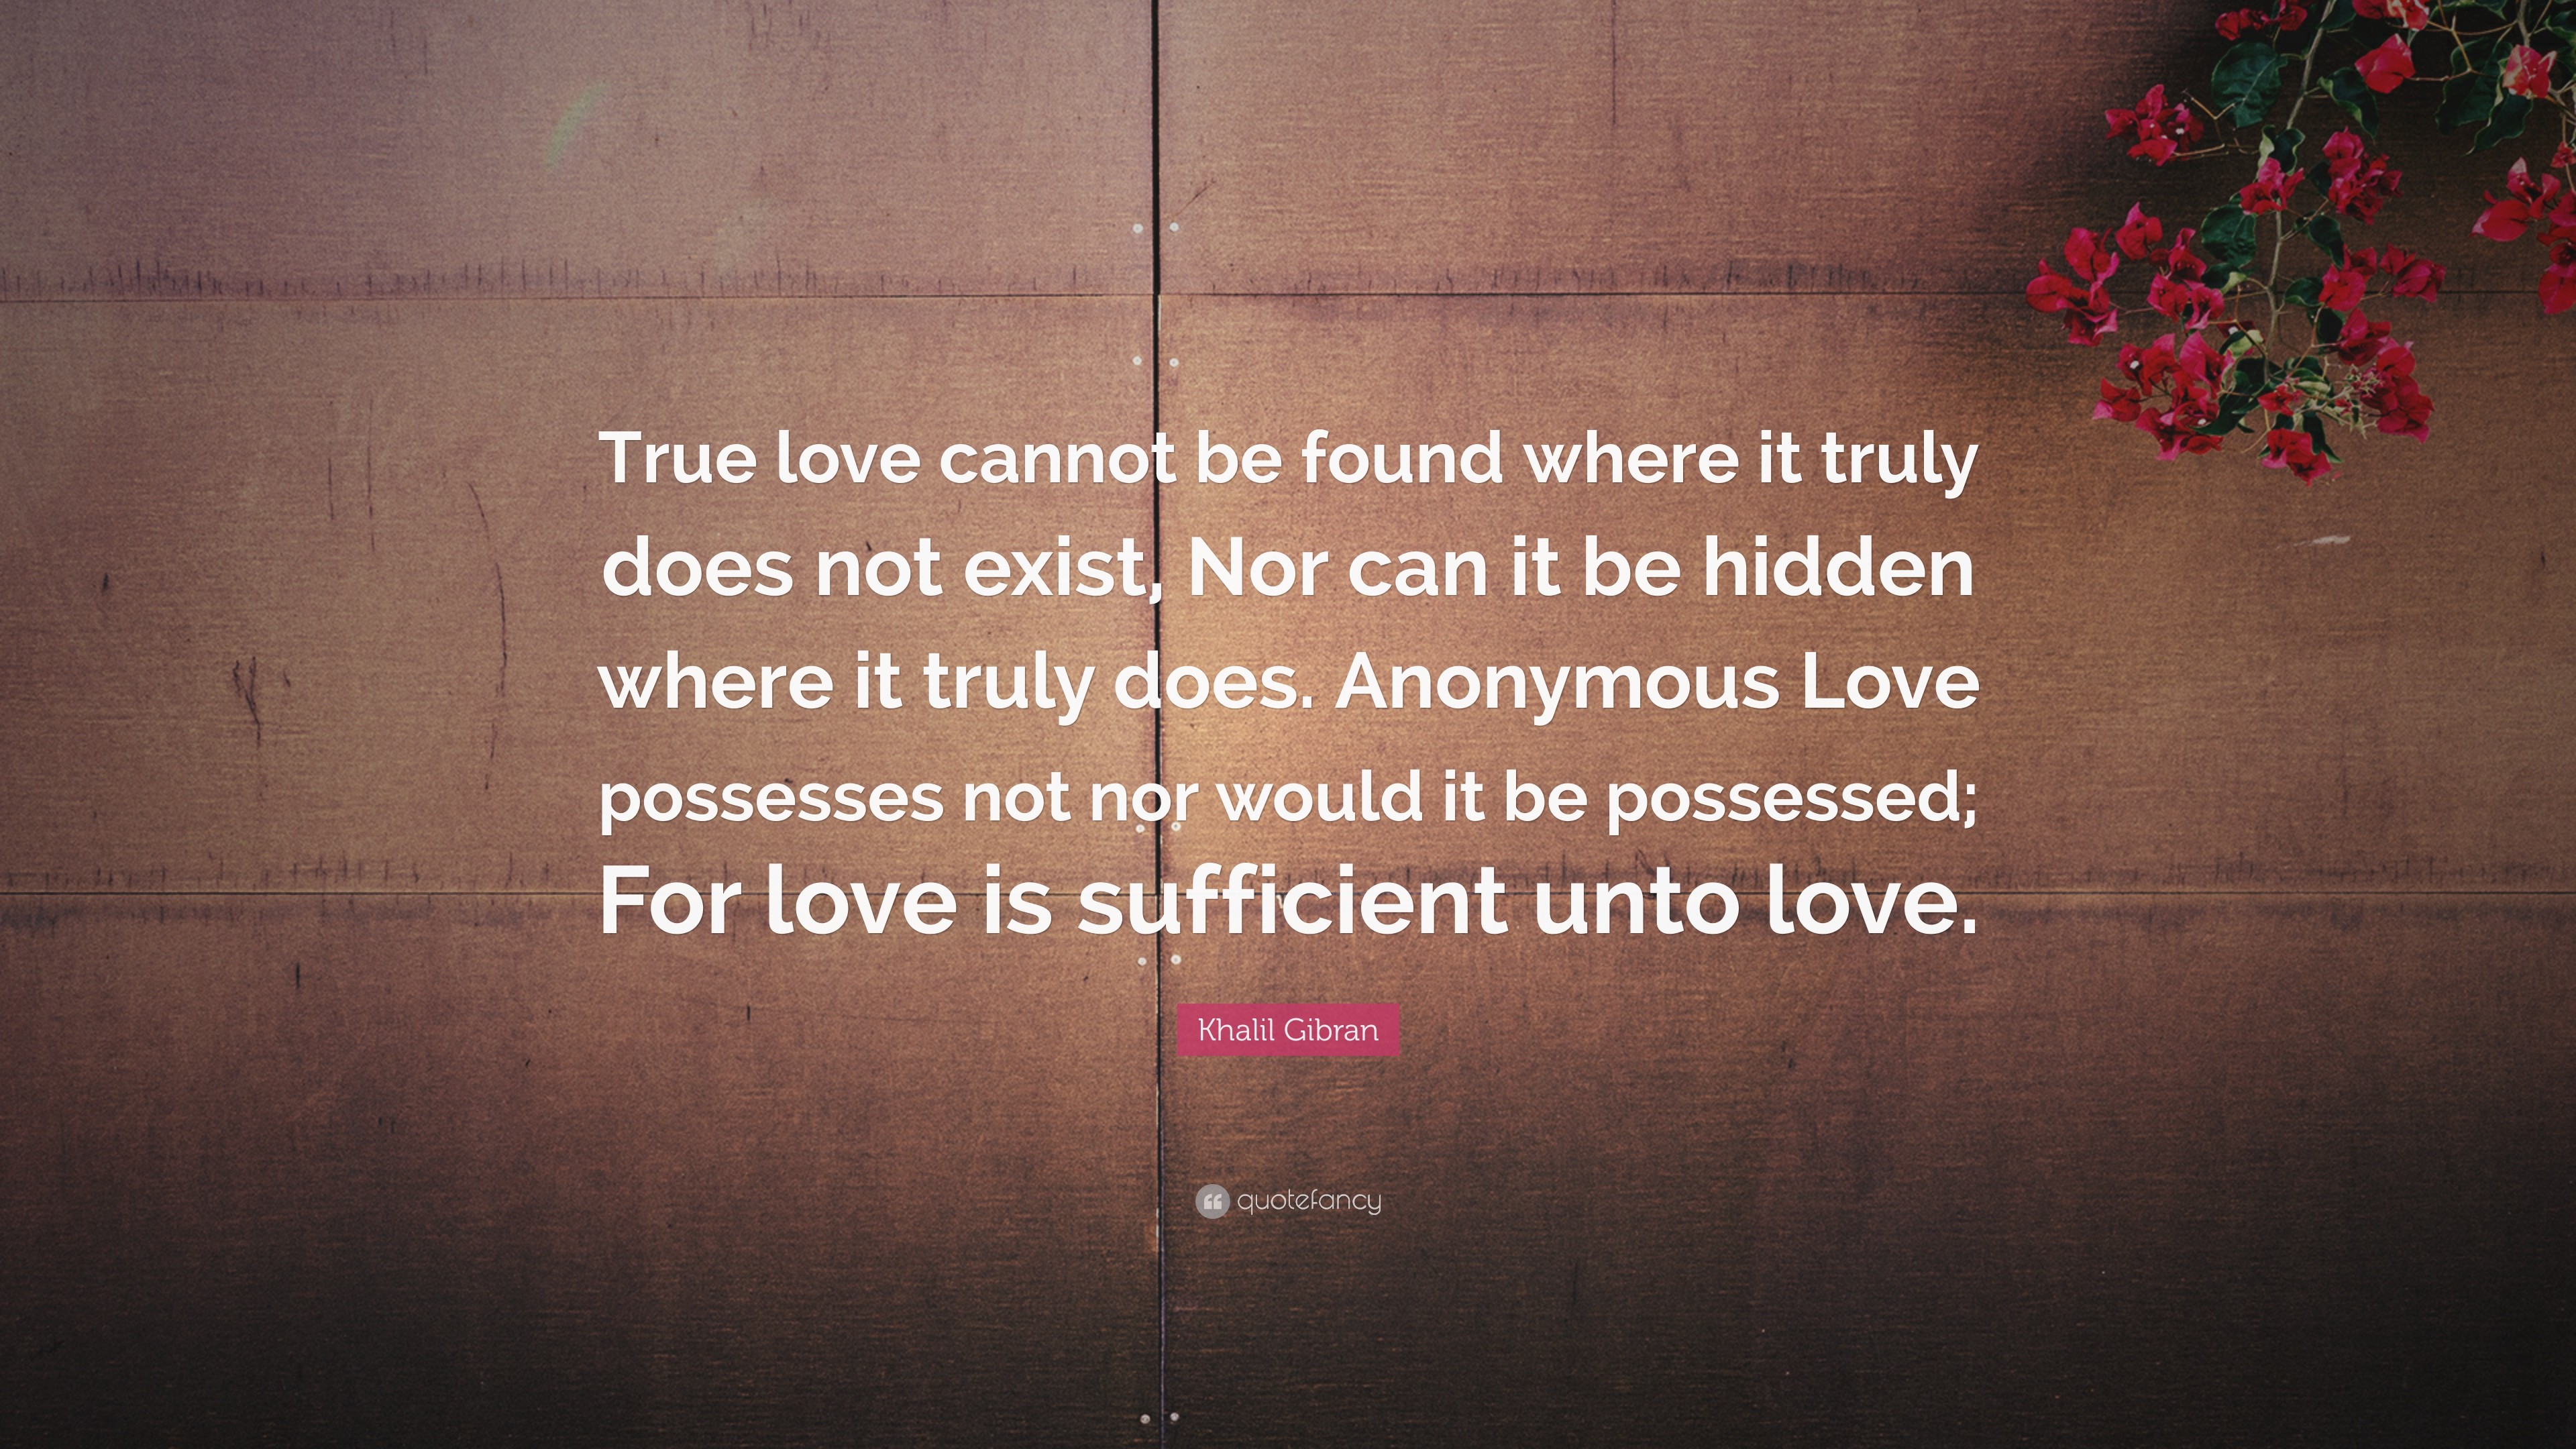 3840x2160 Khalil Gibran Quote: “True love cannot be found where it truly does not  exist